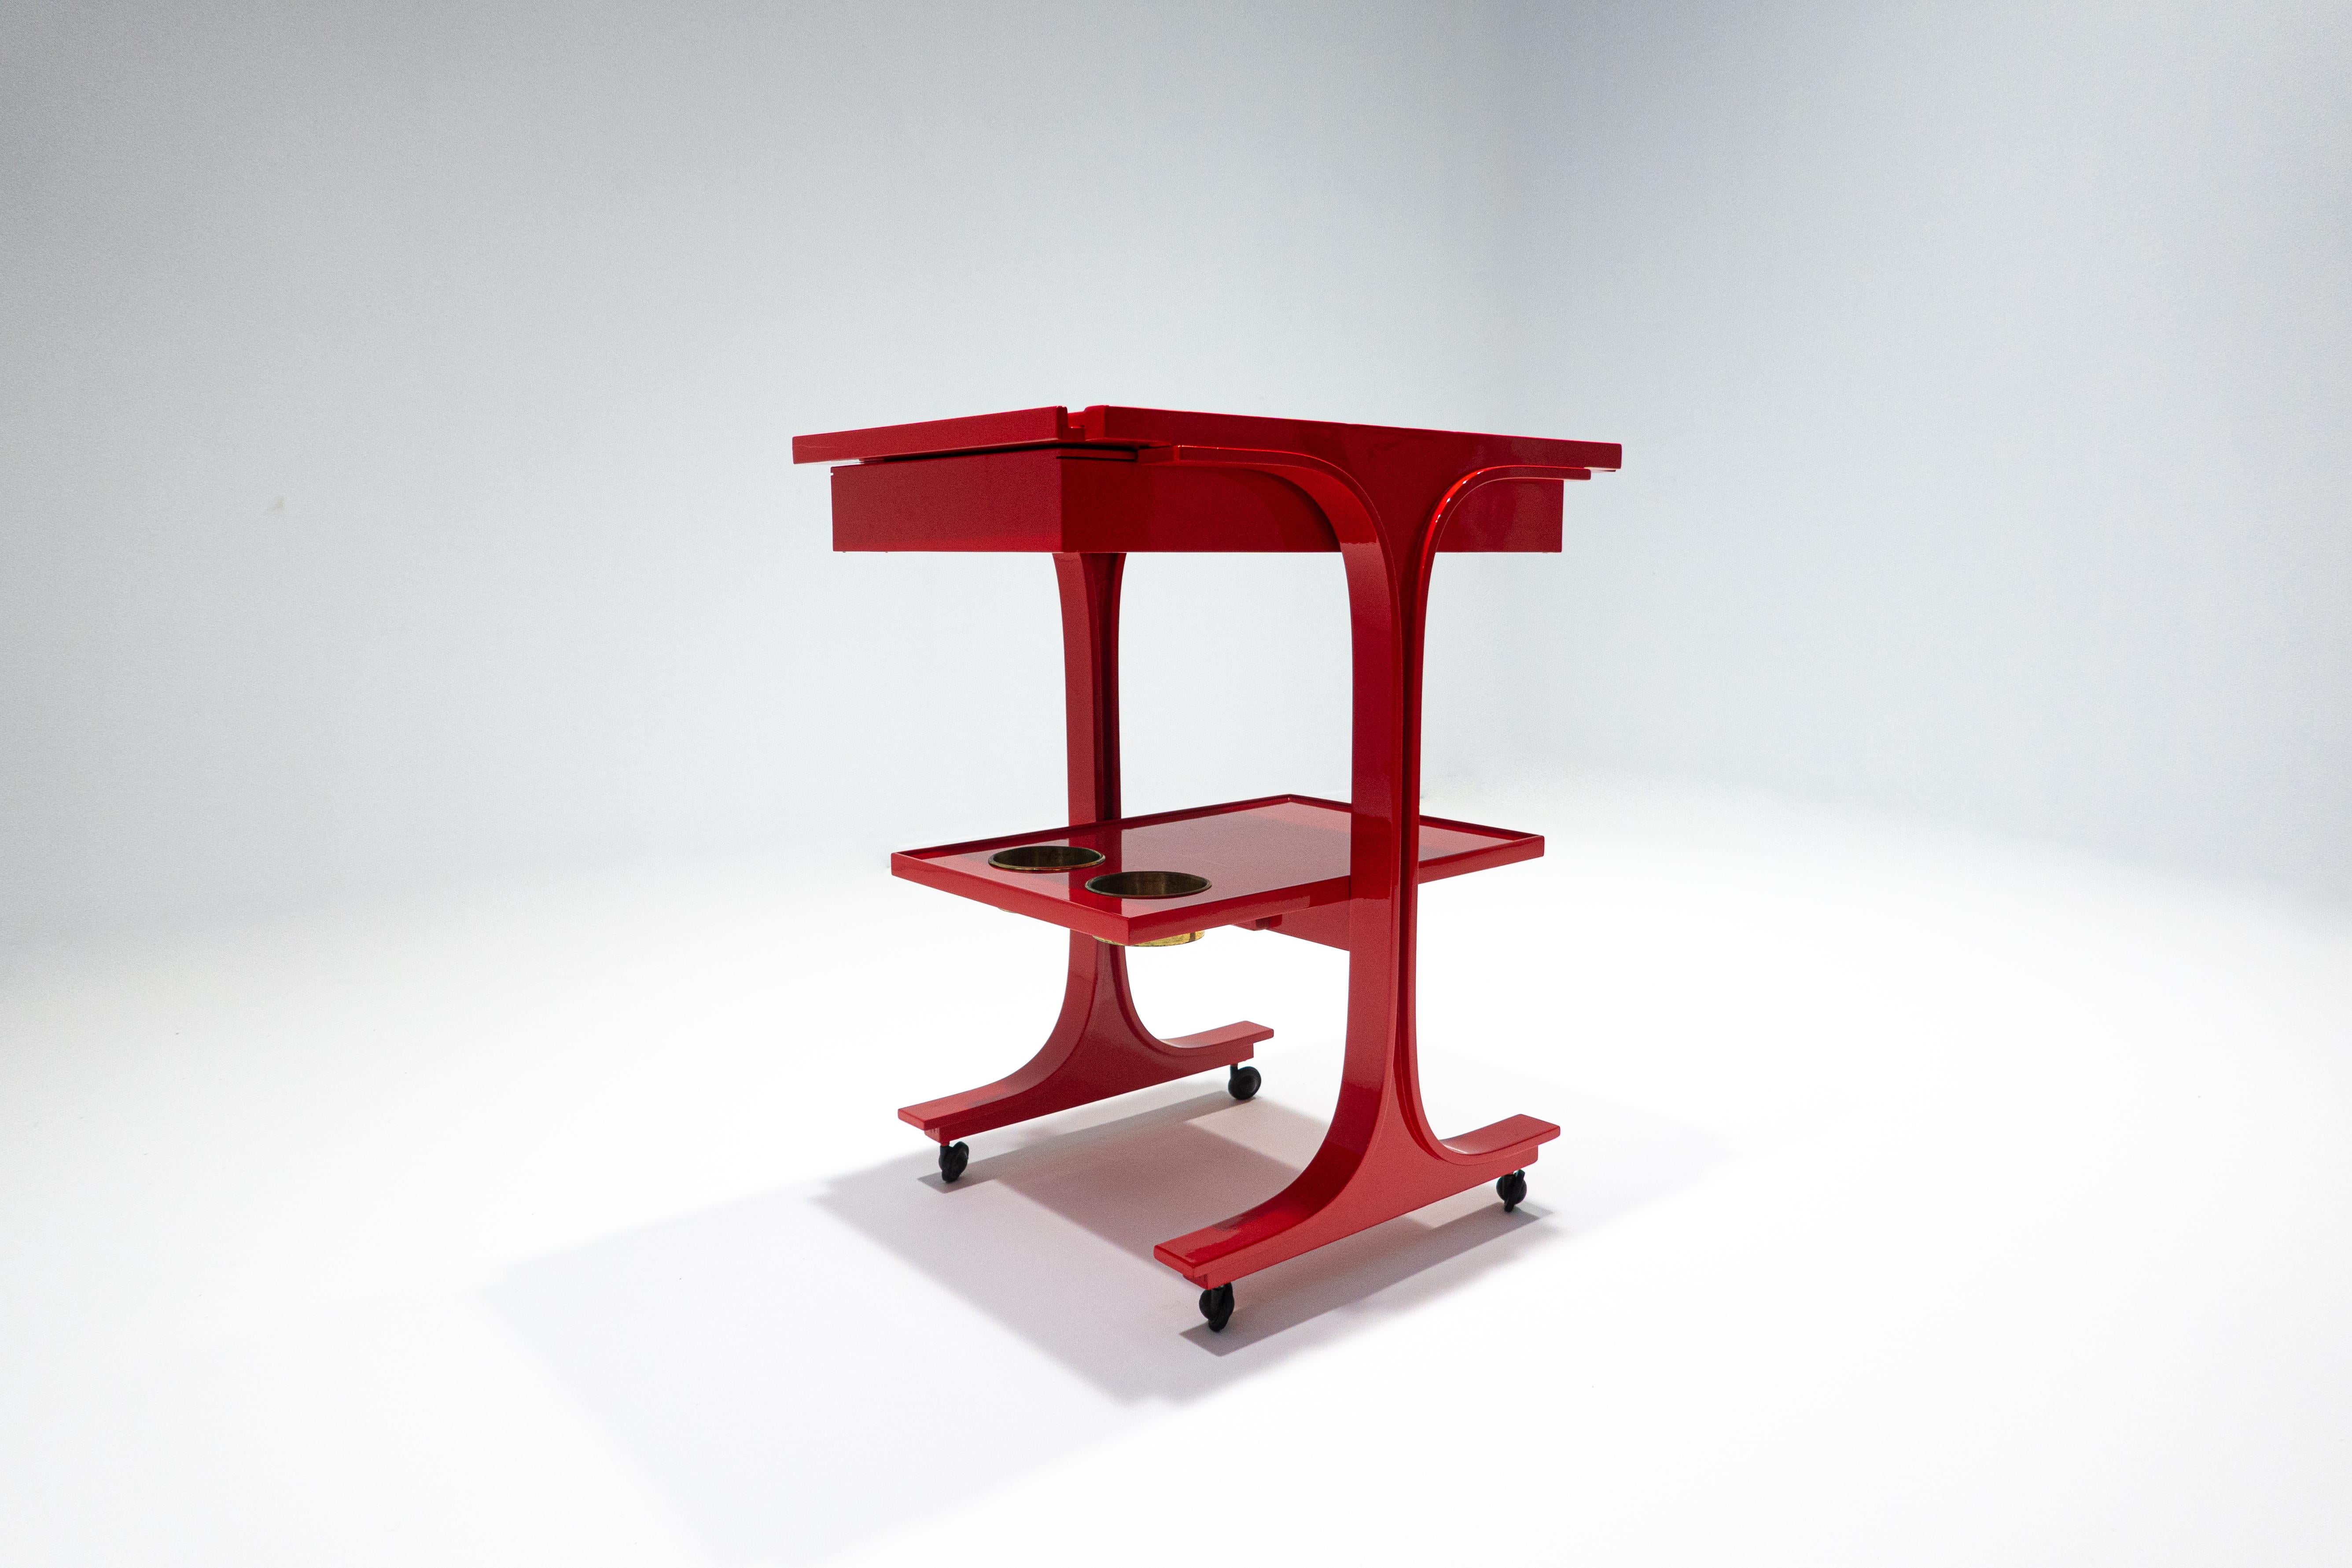 Serving trolley / bar cart by Gianfranco Frattini for Bernini, Red, Italy, 1960s

Lacquered in Red.